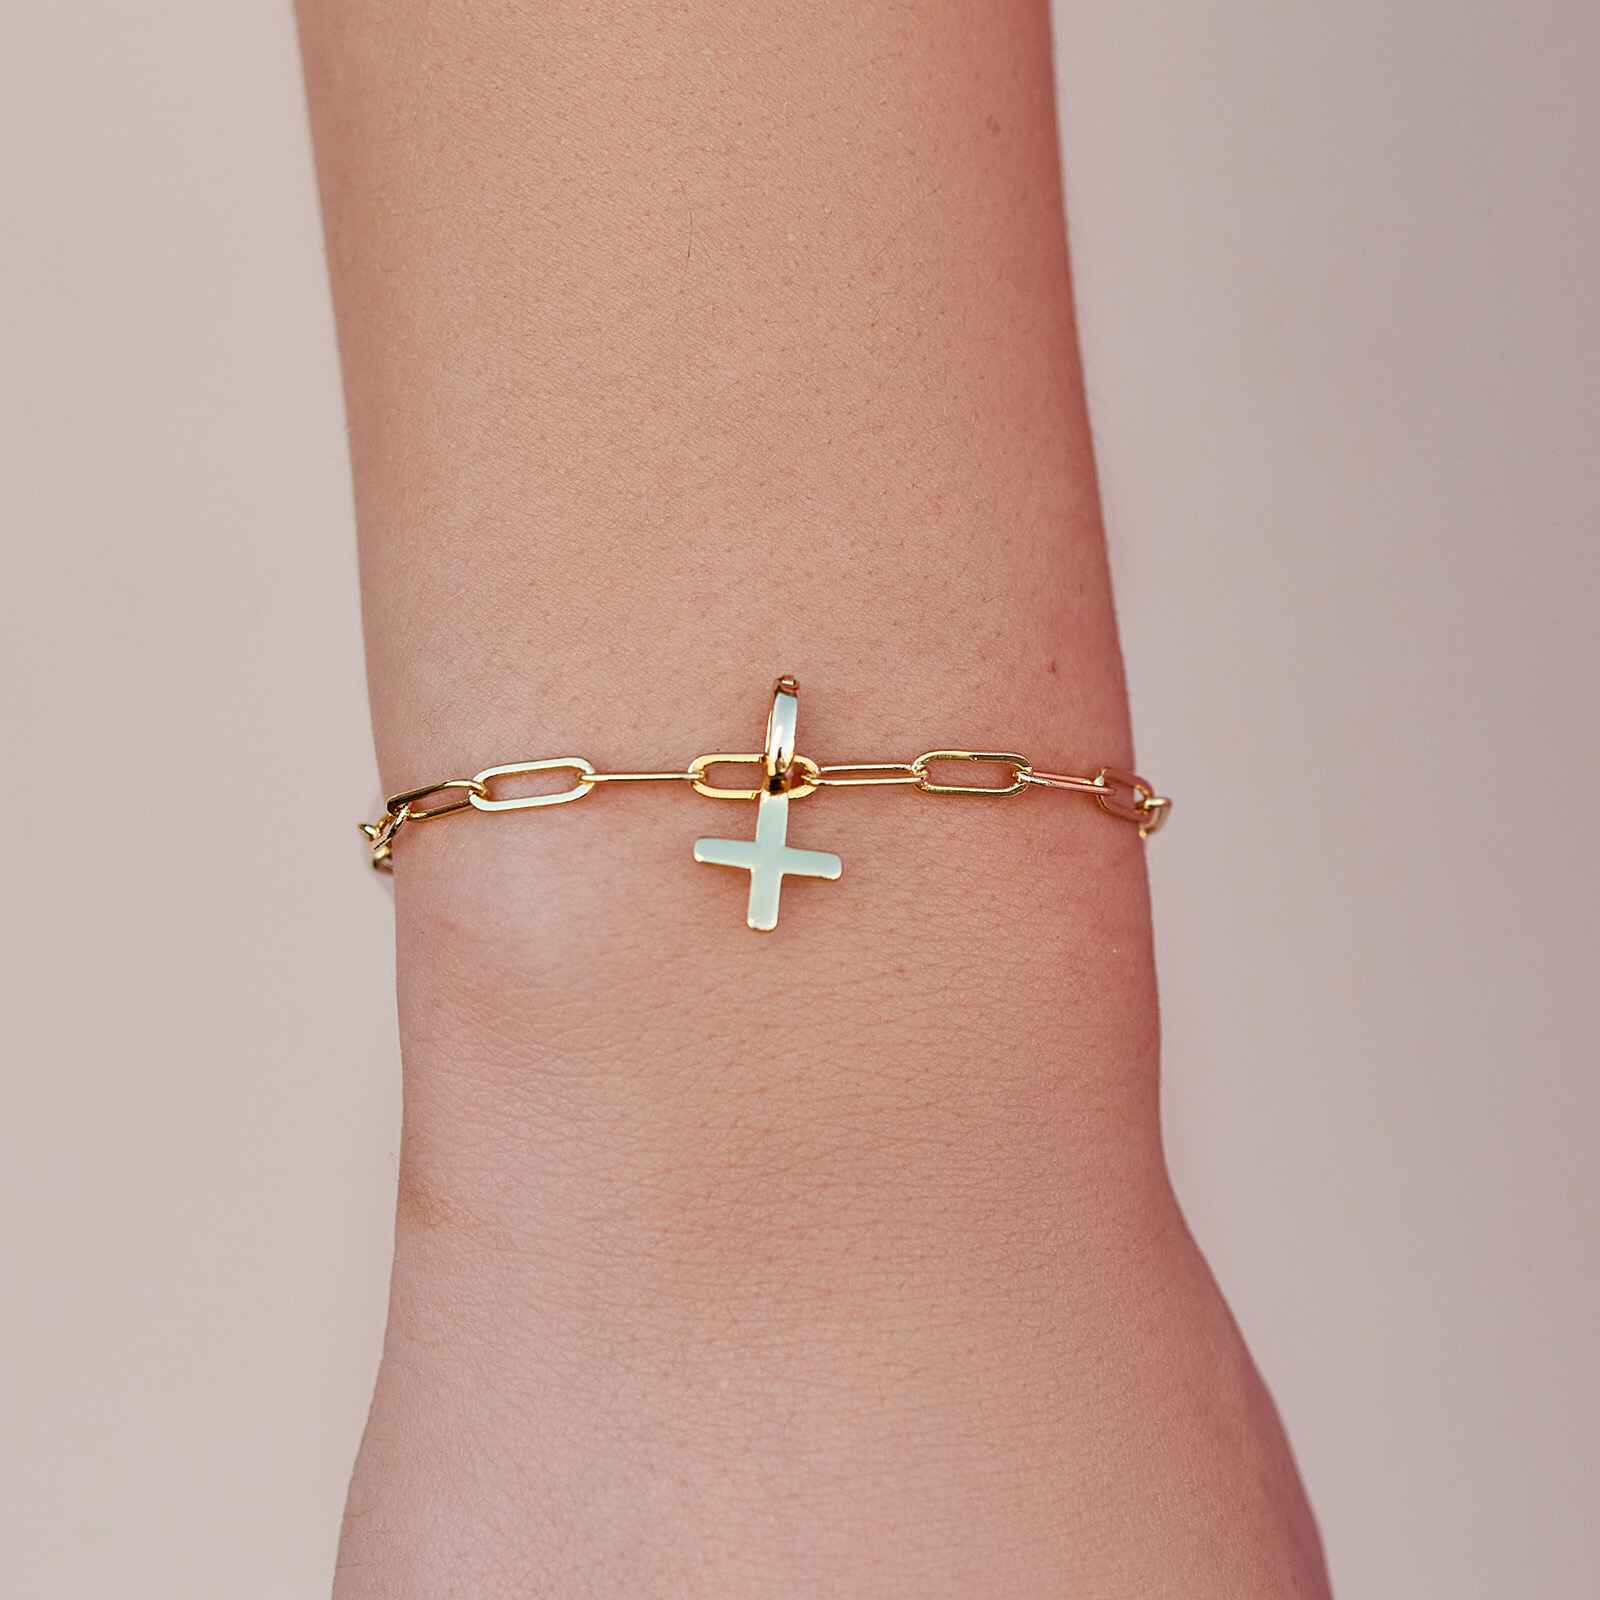 Stainless Steel Love Bracelet With Screwdriver Stone Cross Rose  Gold/Silver, Plus Sign Luxury Jewelry For Women 230803 From Lang05, $10.42  | DHgate.Com